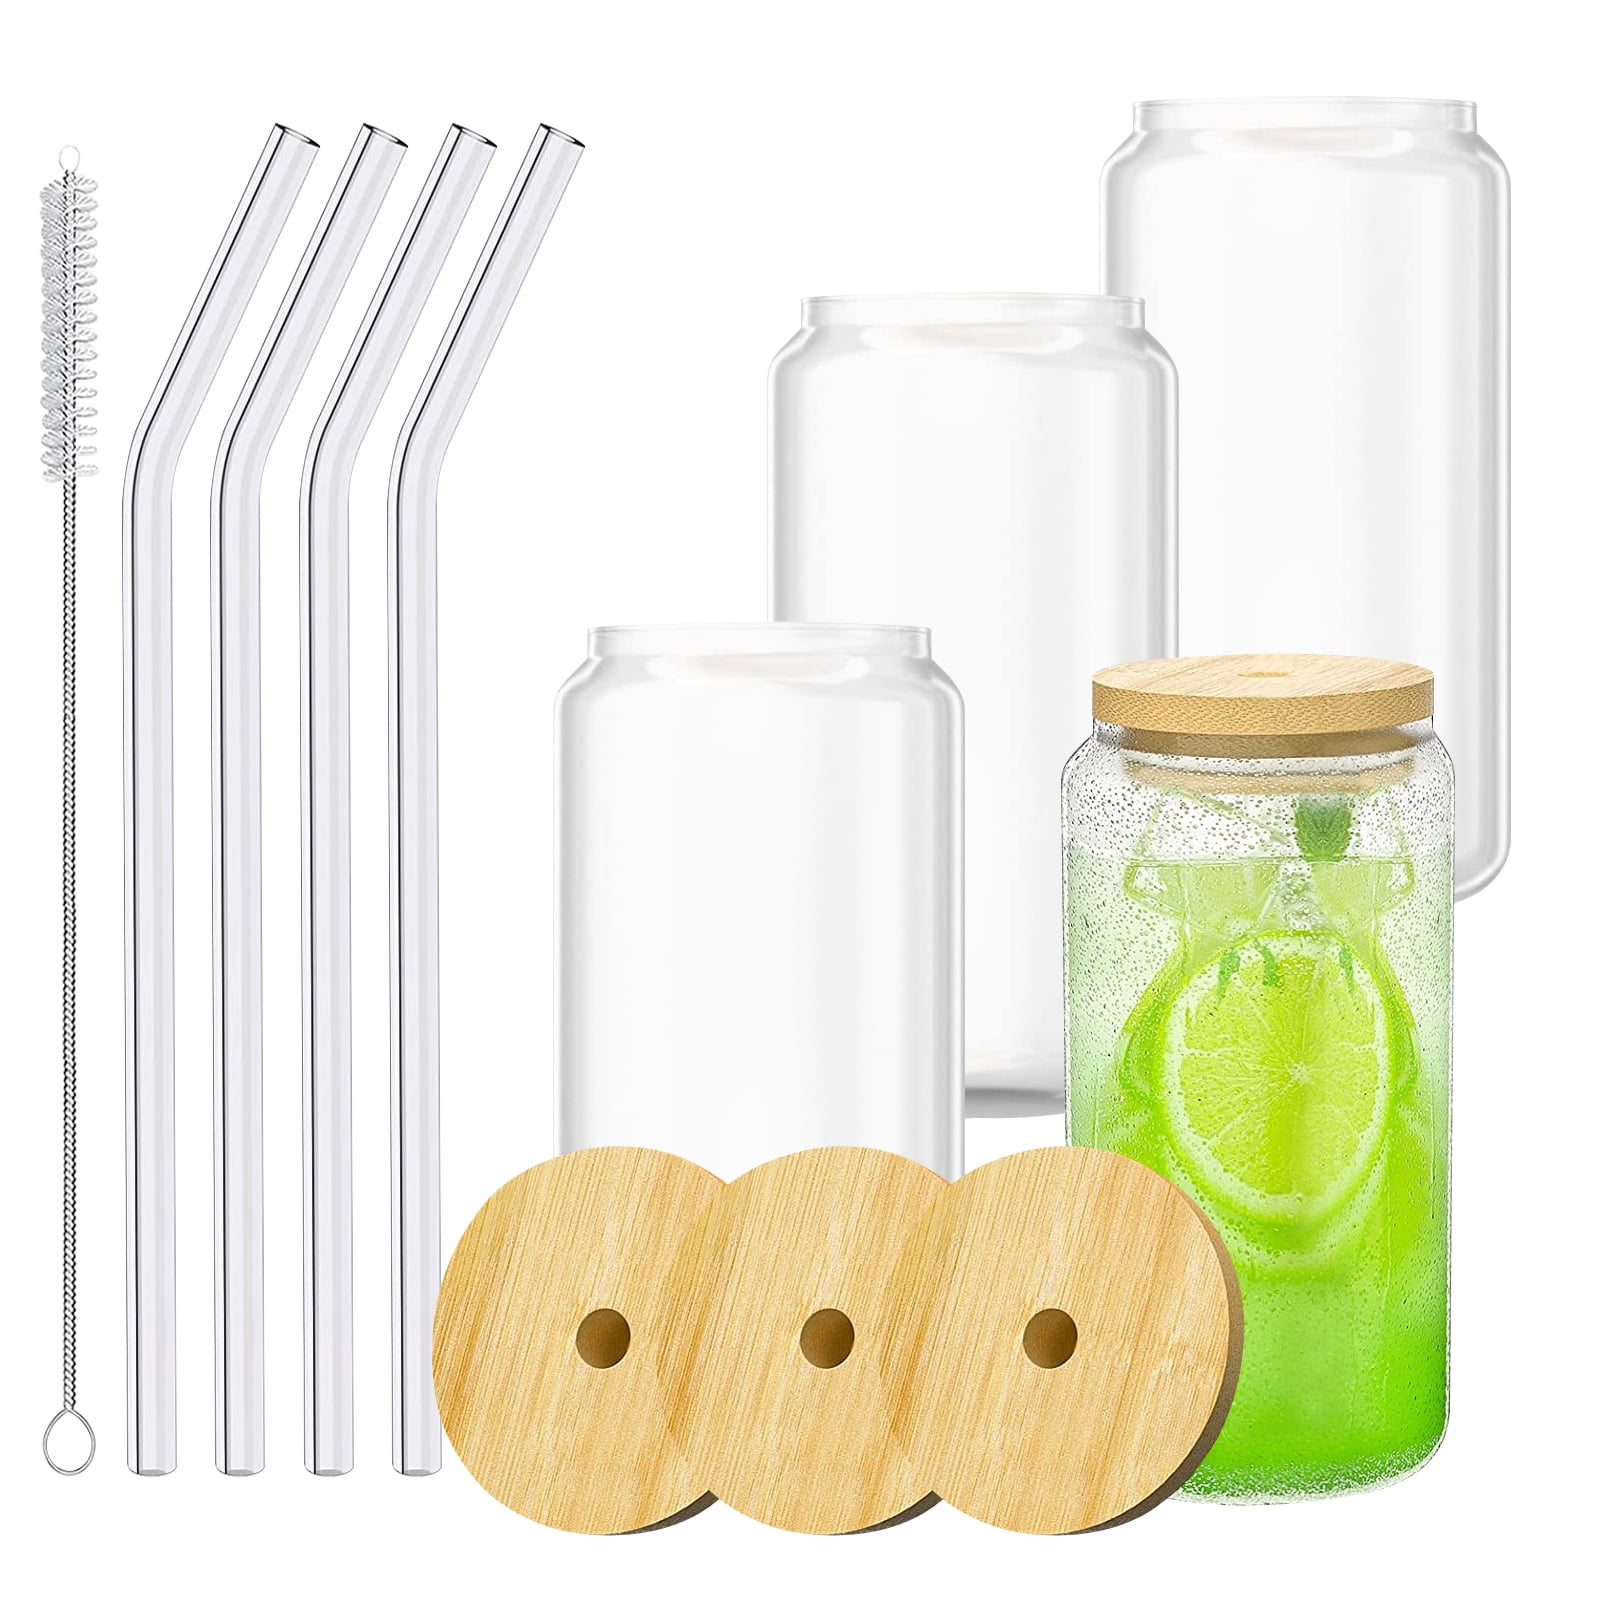 COOL GEAR 4-Pack Bamboo Reusable Containers